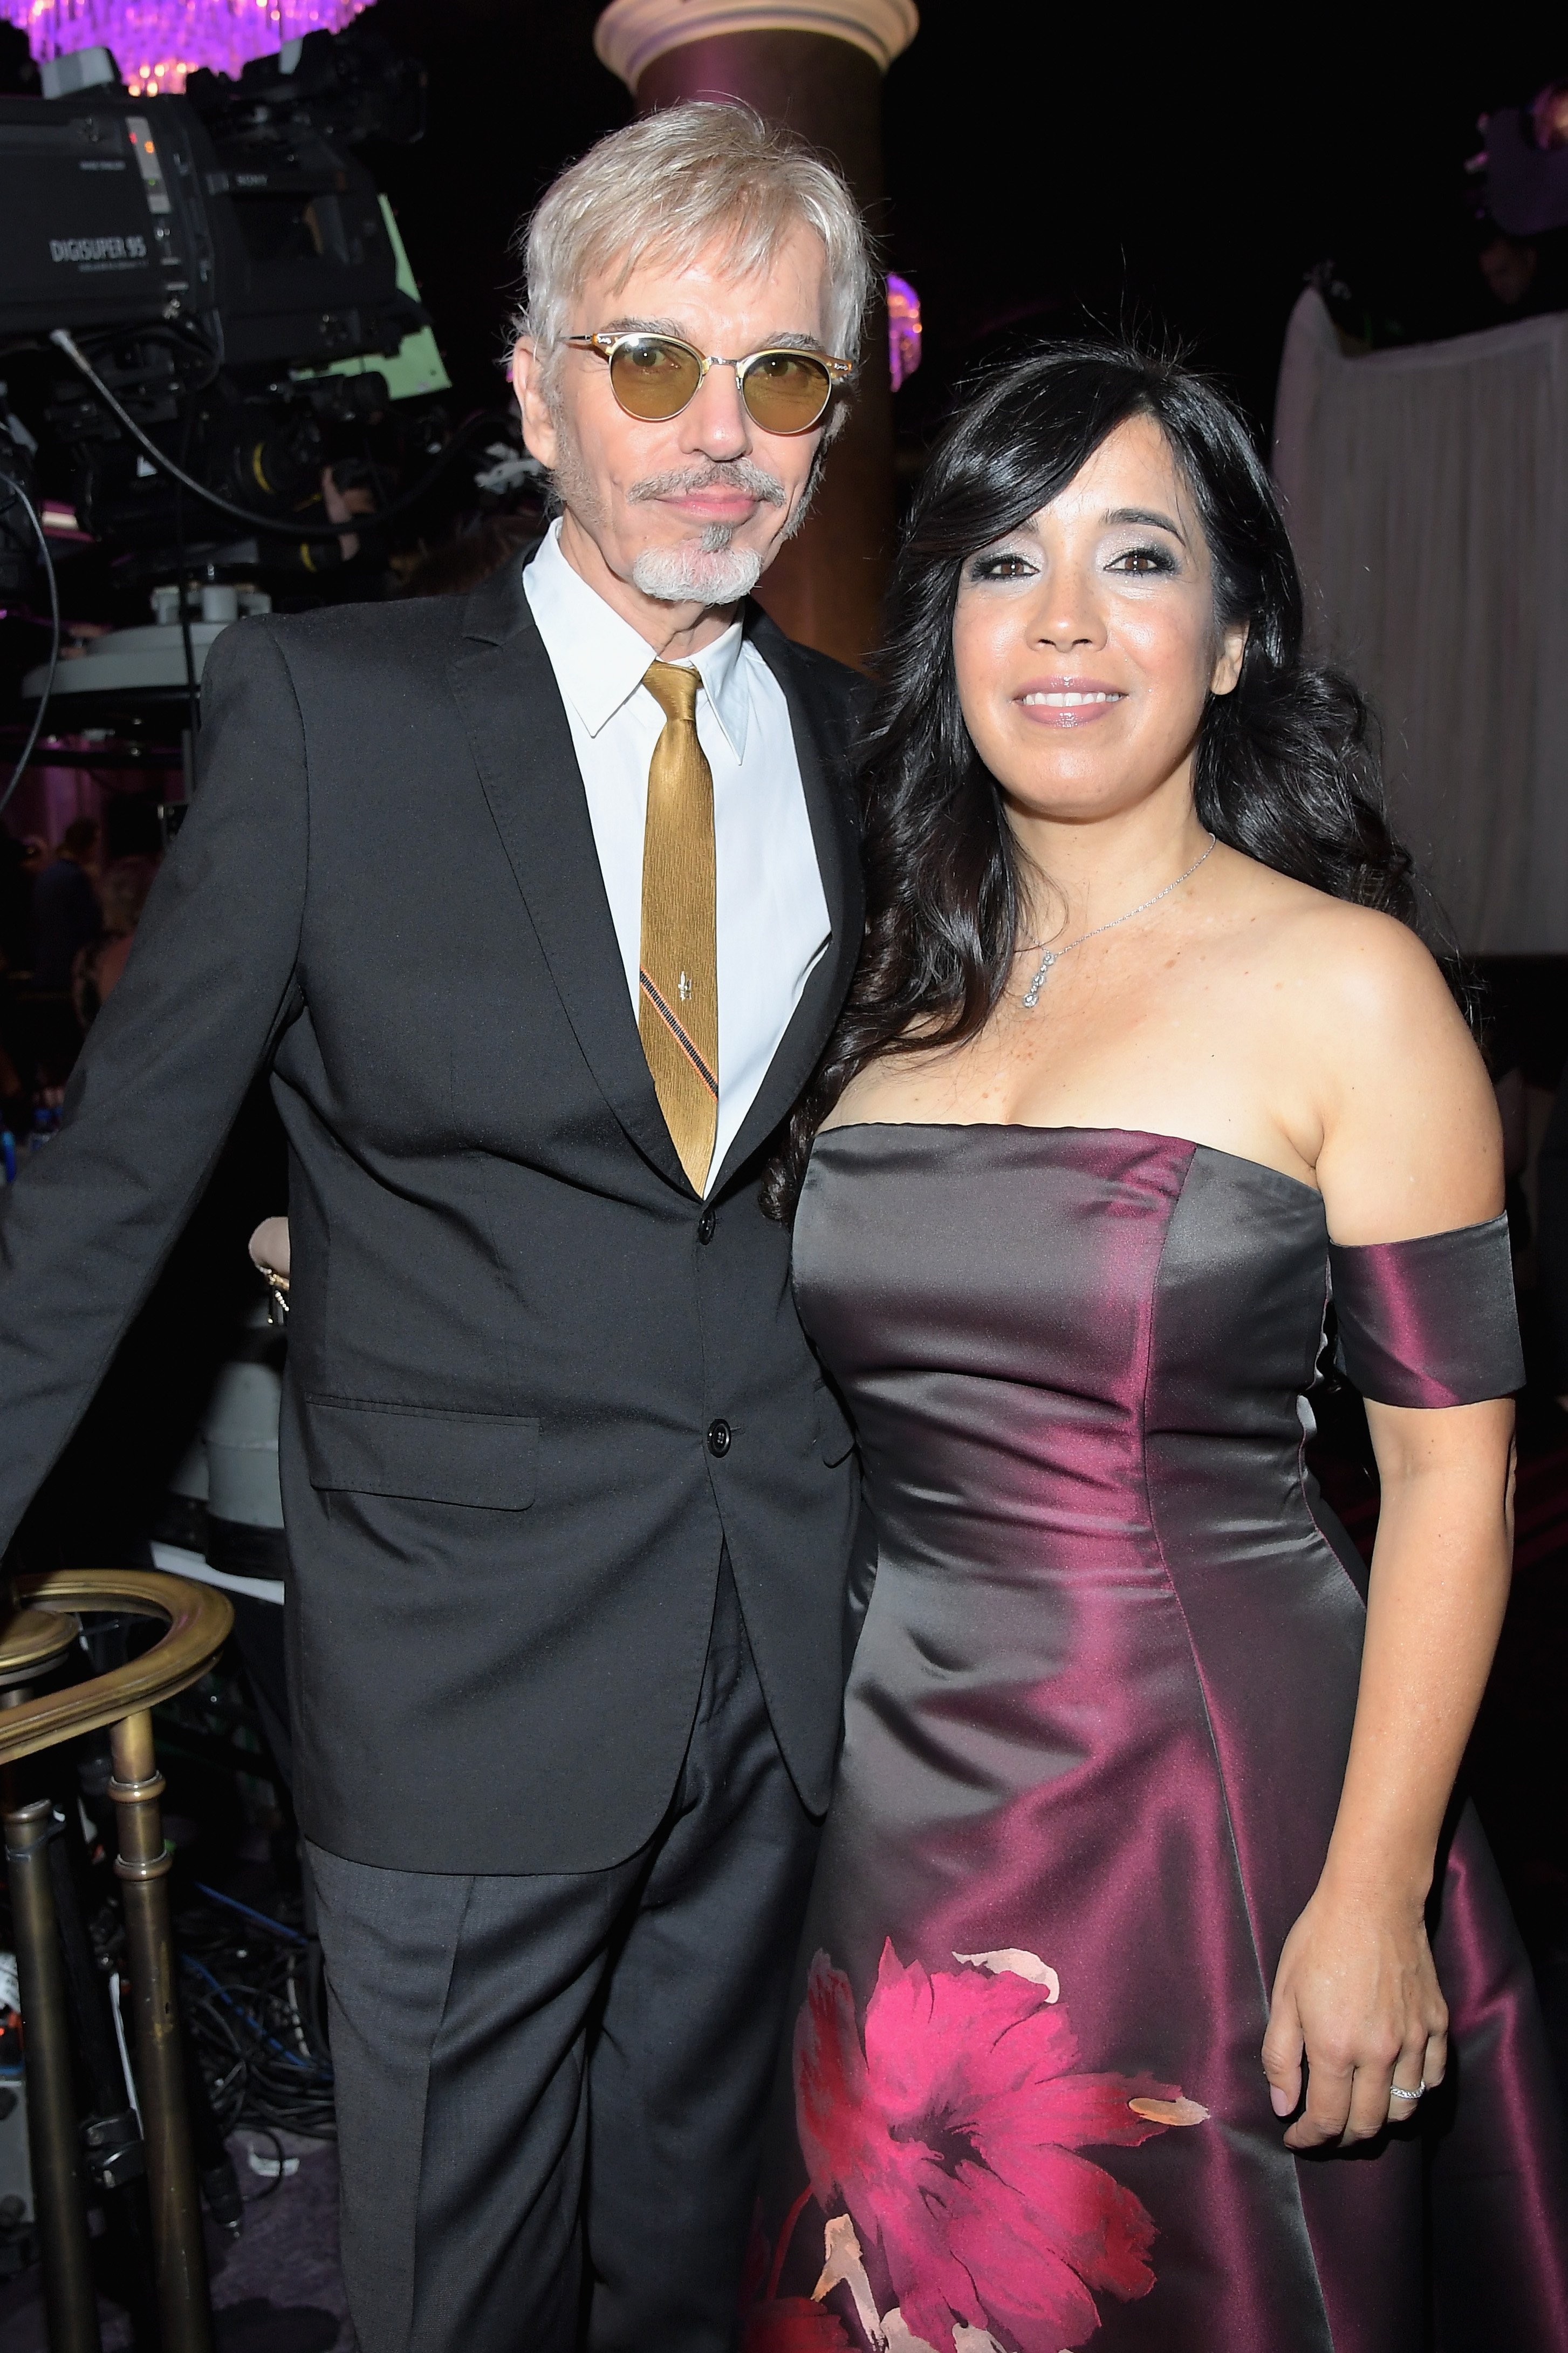 Billy Bob Thornton and Connie Angland at the 74th annual Golden Globe Awards on January 8, 2017 | Source: Getty Images